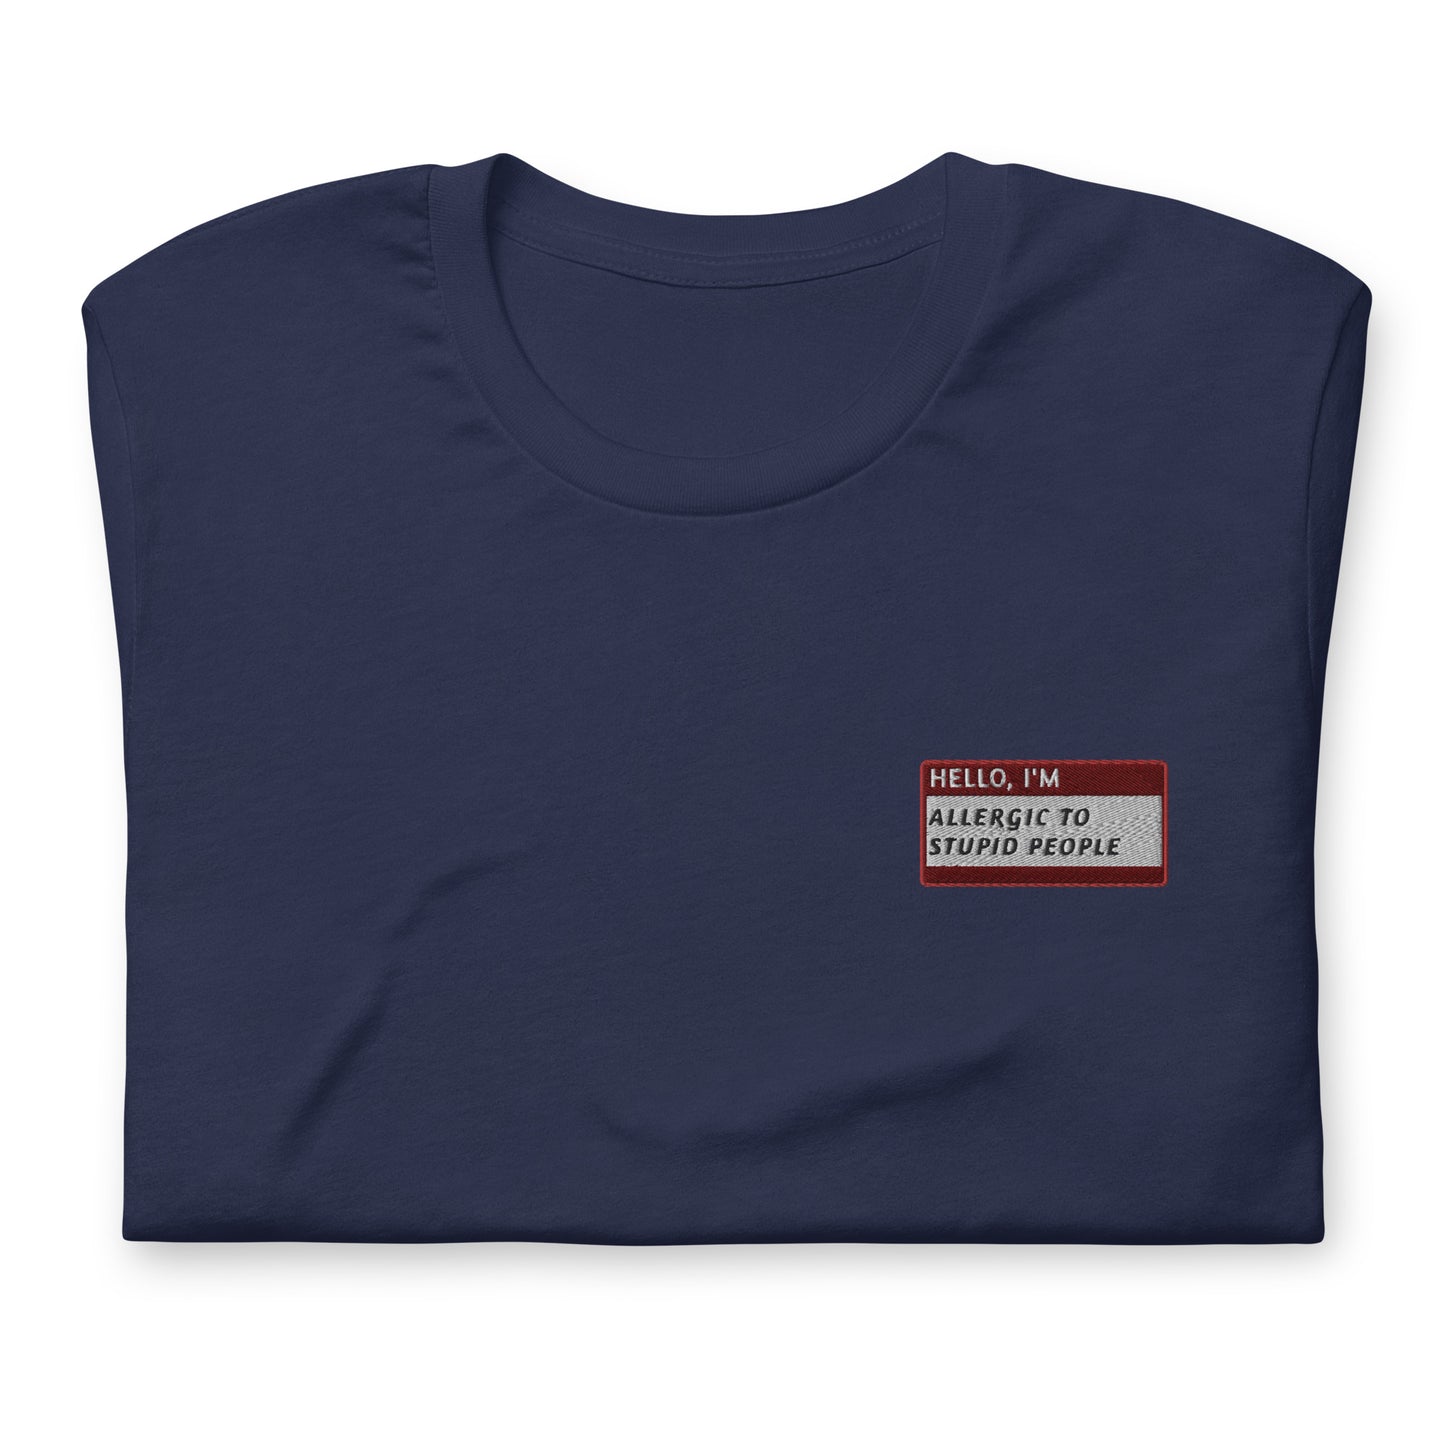 HELLO I'M ALLERGIC TO STUPID PEOPLE - Name Tag T-Shirt